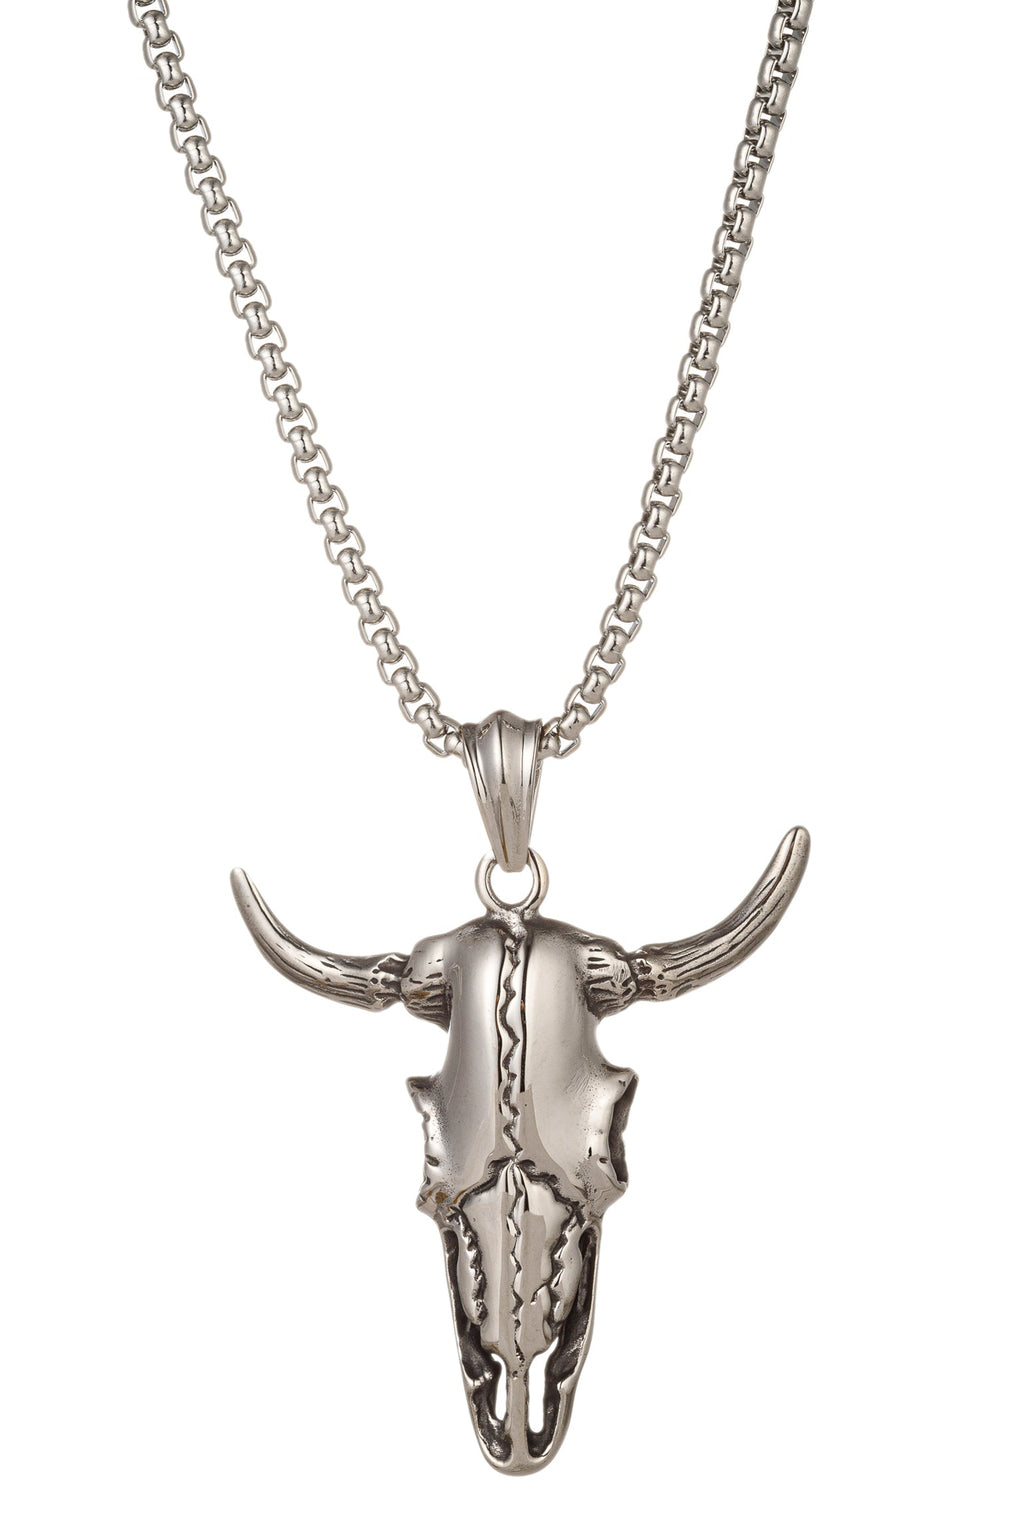 Unleash Your Inner Strength with Our Bull Head Pendant Necklace.